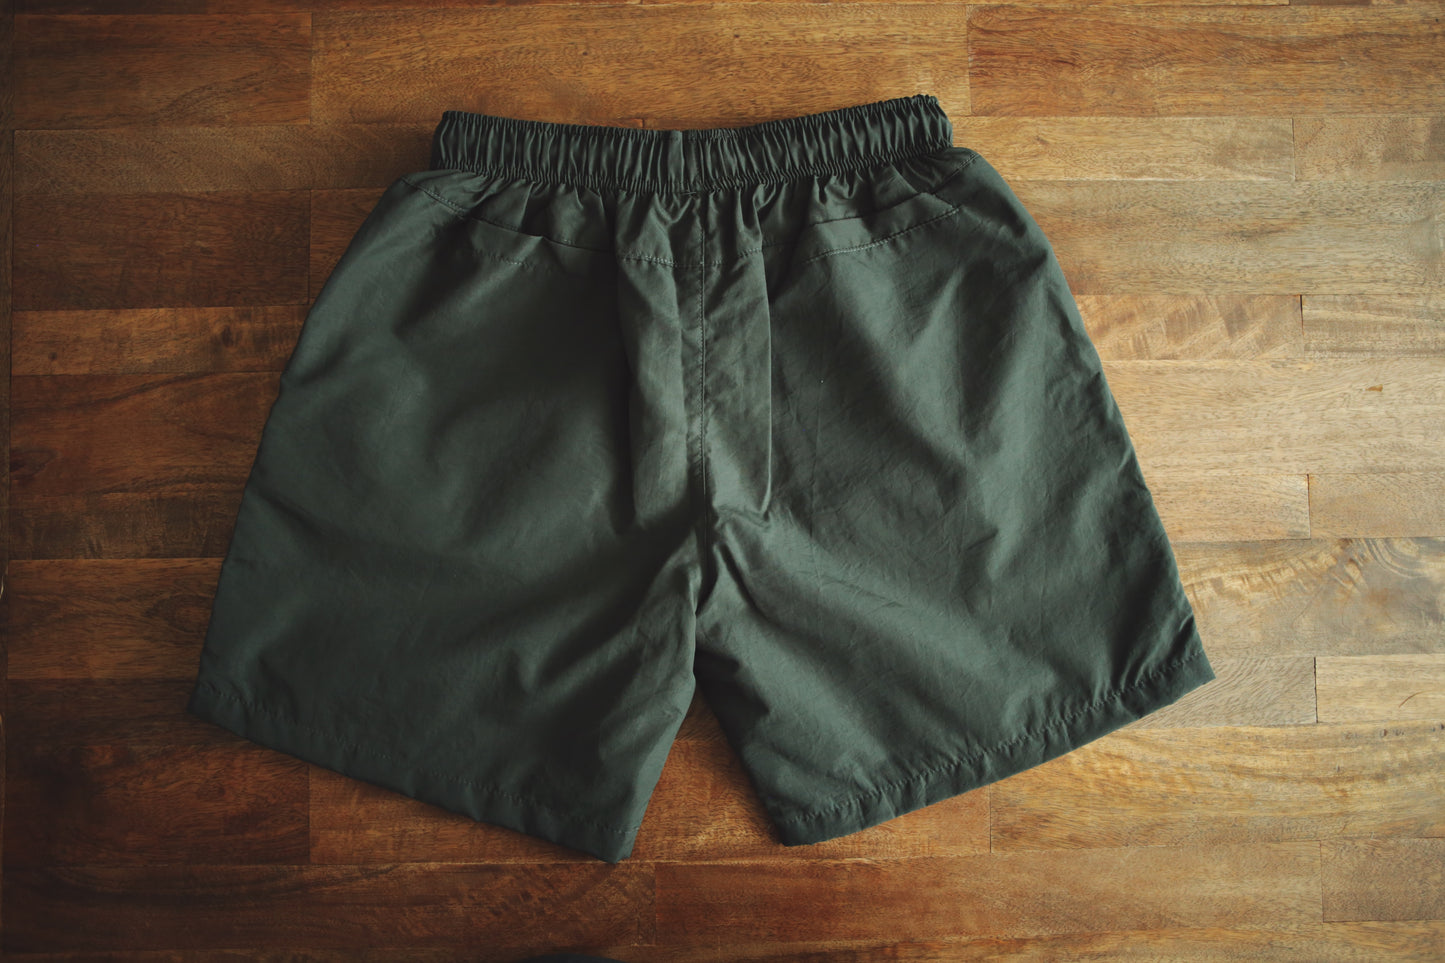 THE "DOWN FOR WHATEVER" SHORTS